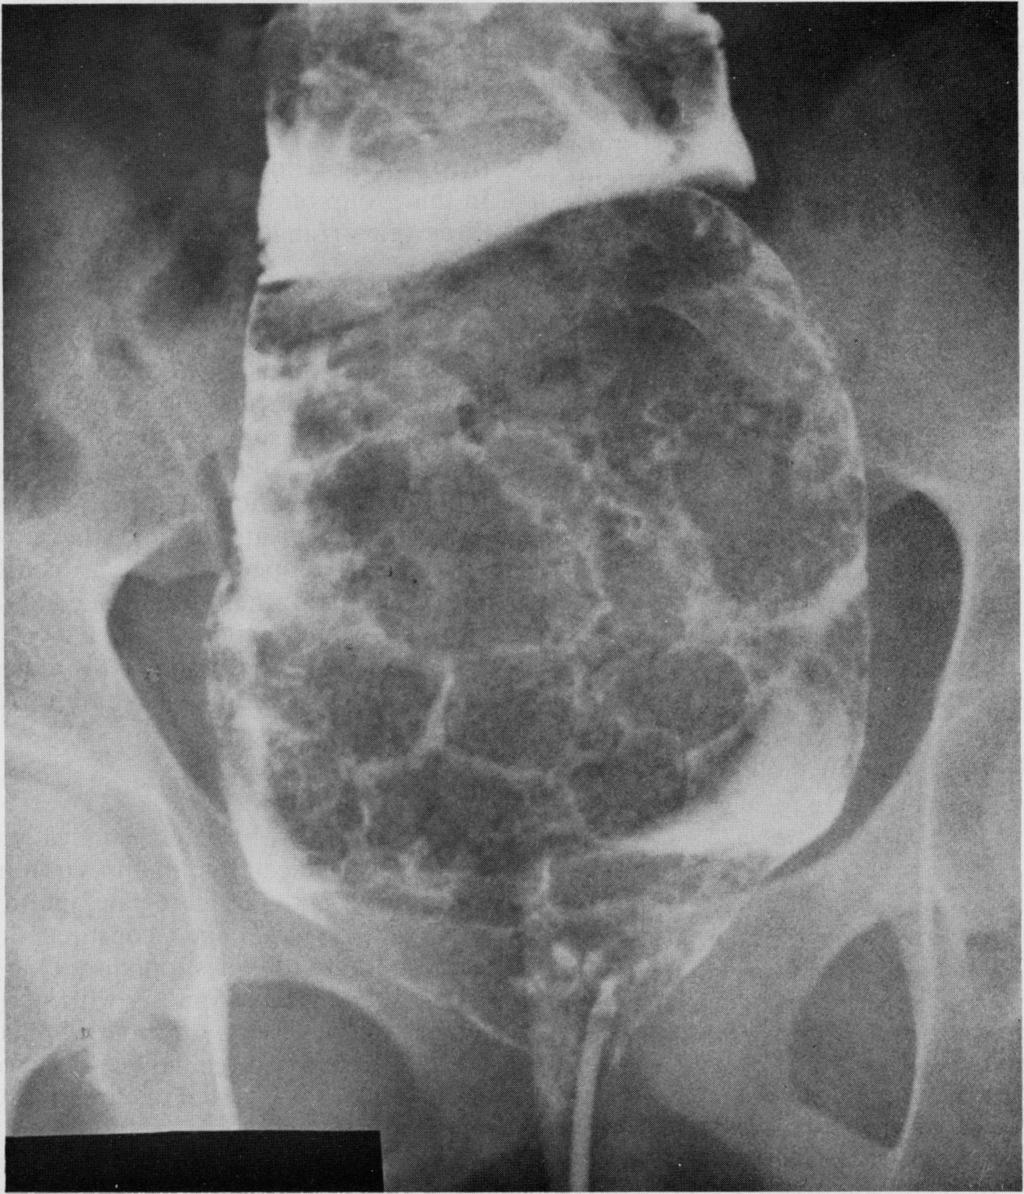 Hirschsprung's disease and idiopathic megacolon in adults and adolescents had a mean age of onset of 29 years (range 11-59 years) and presented at a mean age of 38 years (range 15-68 years).